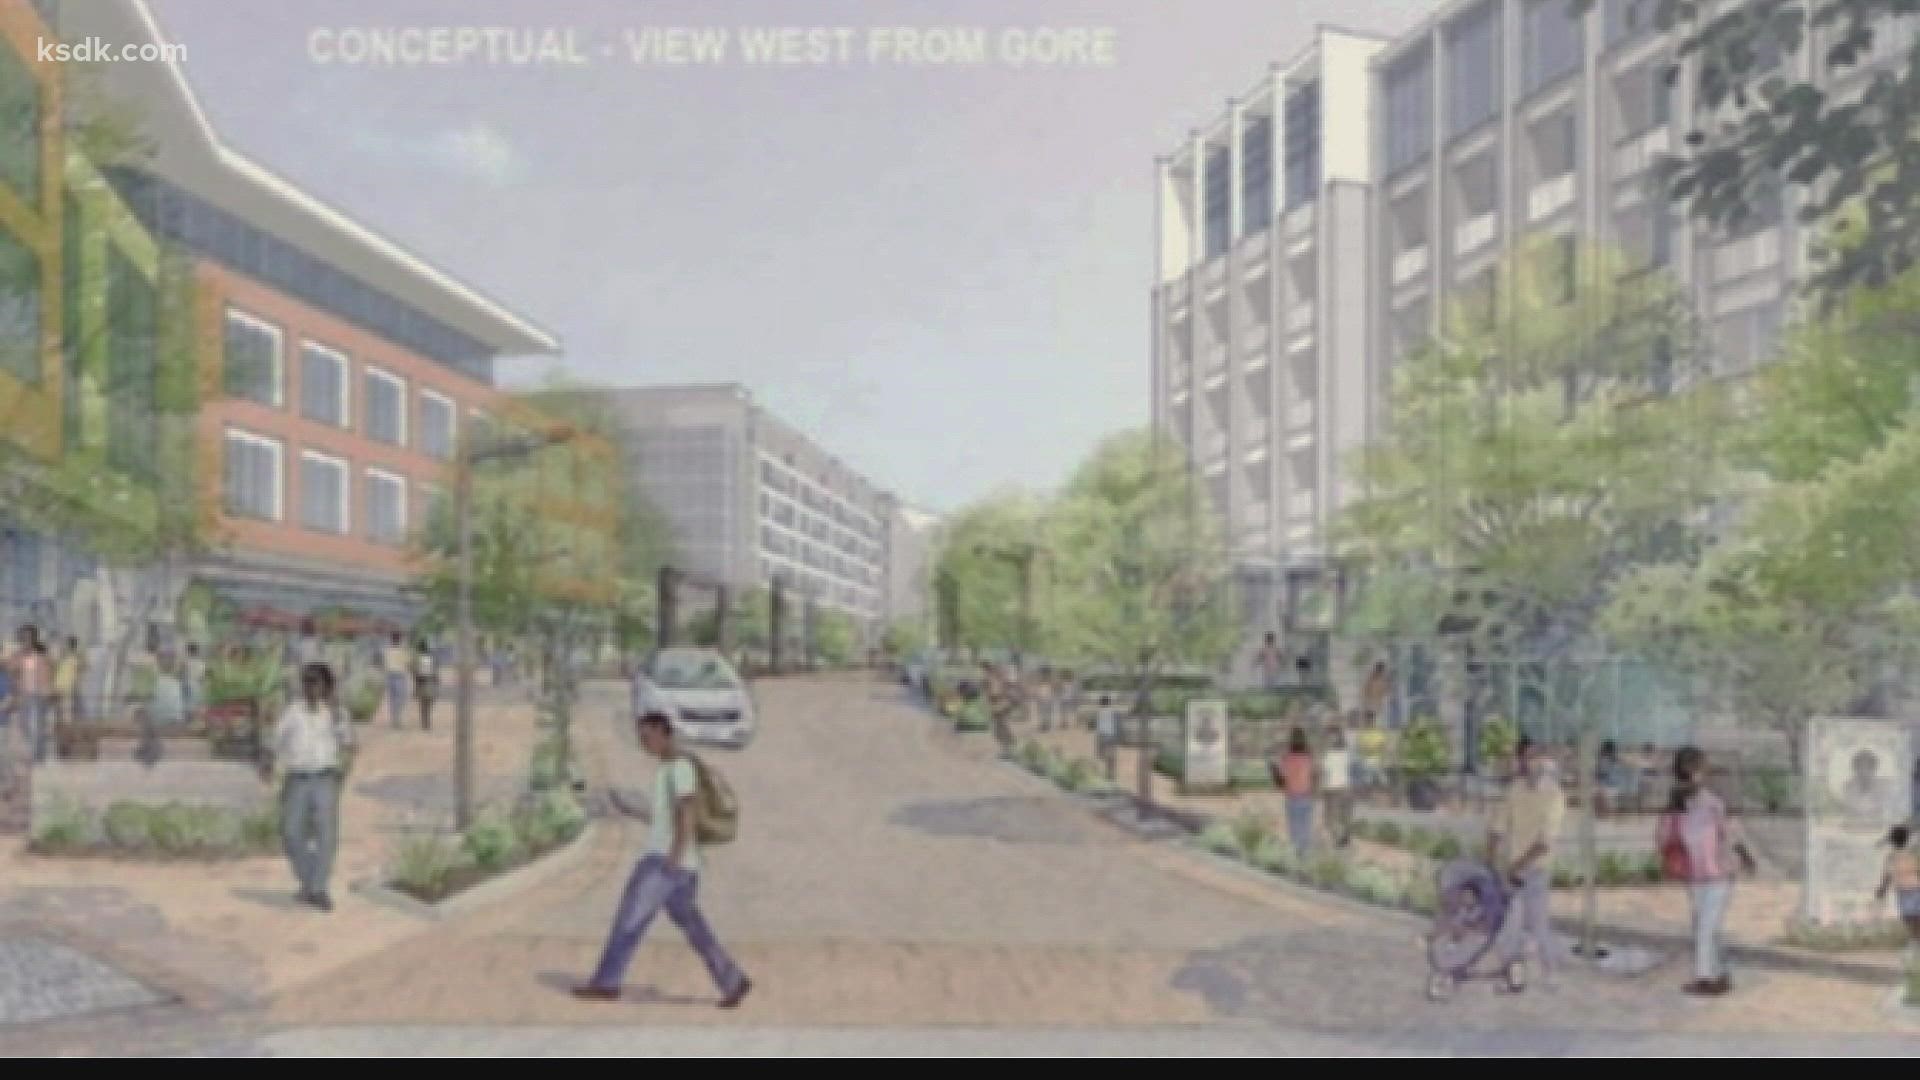 The Webster Groves City Council unanimously rejected a necessary zoning change for a plan to remake 'Old Webster.' The council voted Tuesday night.